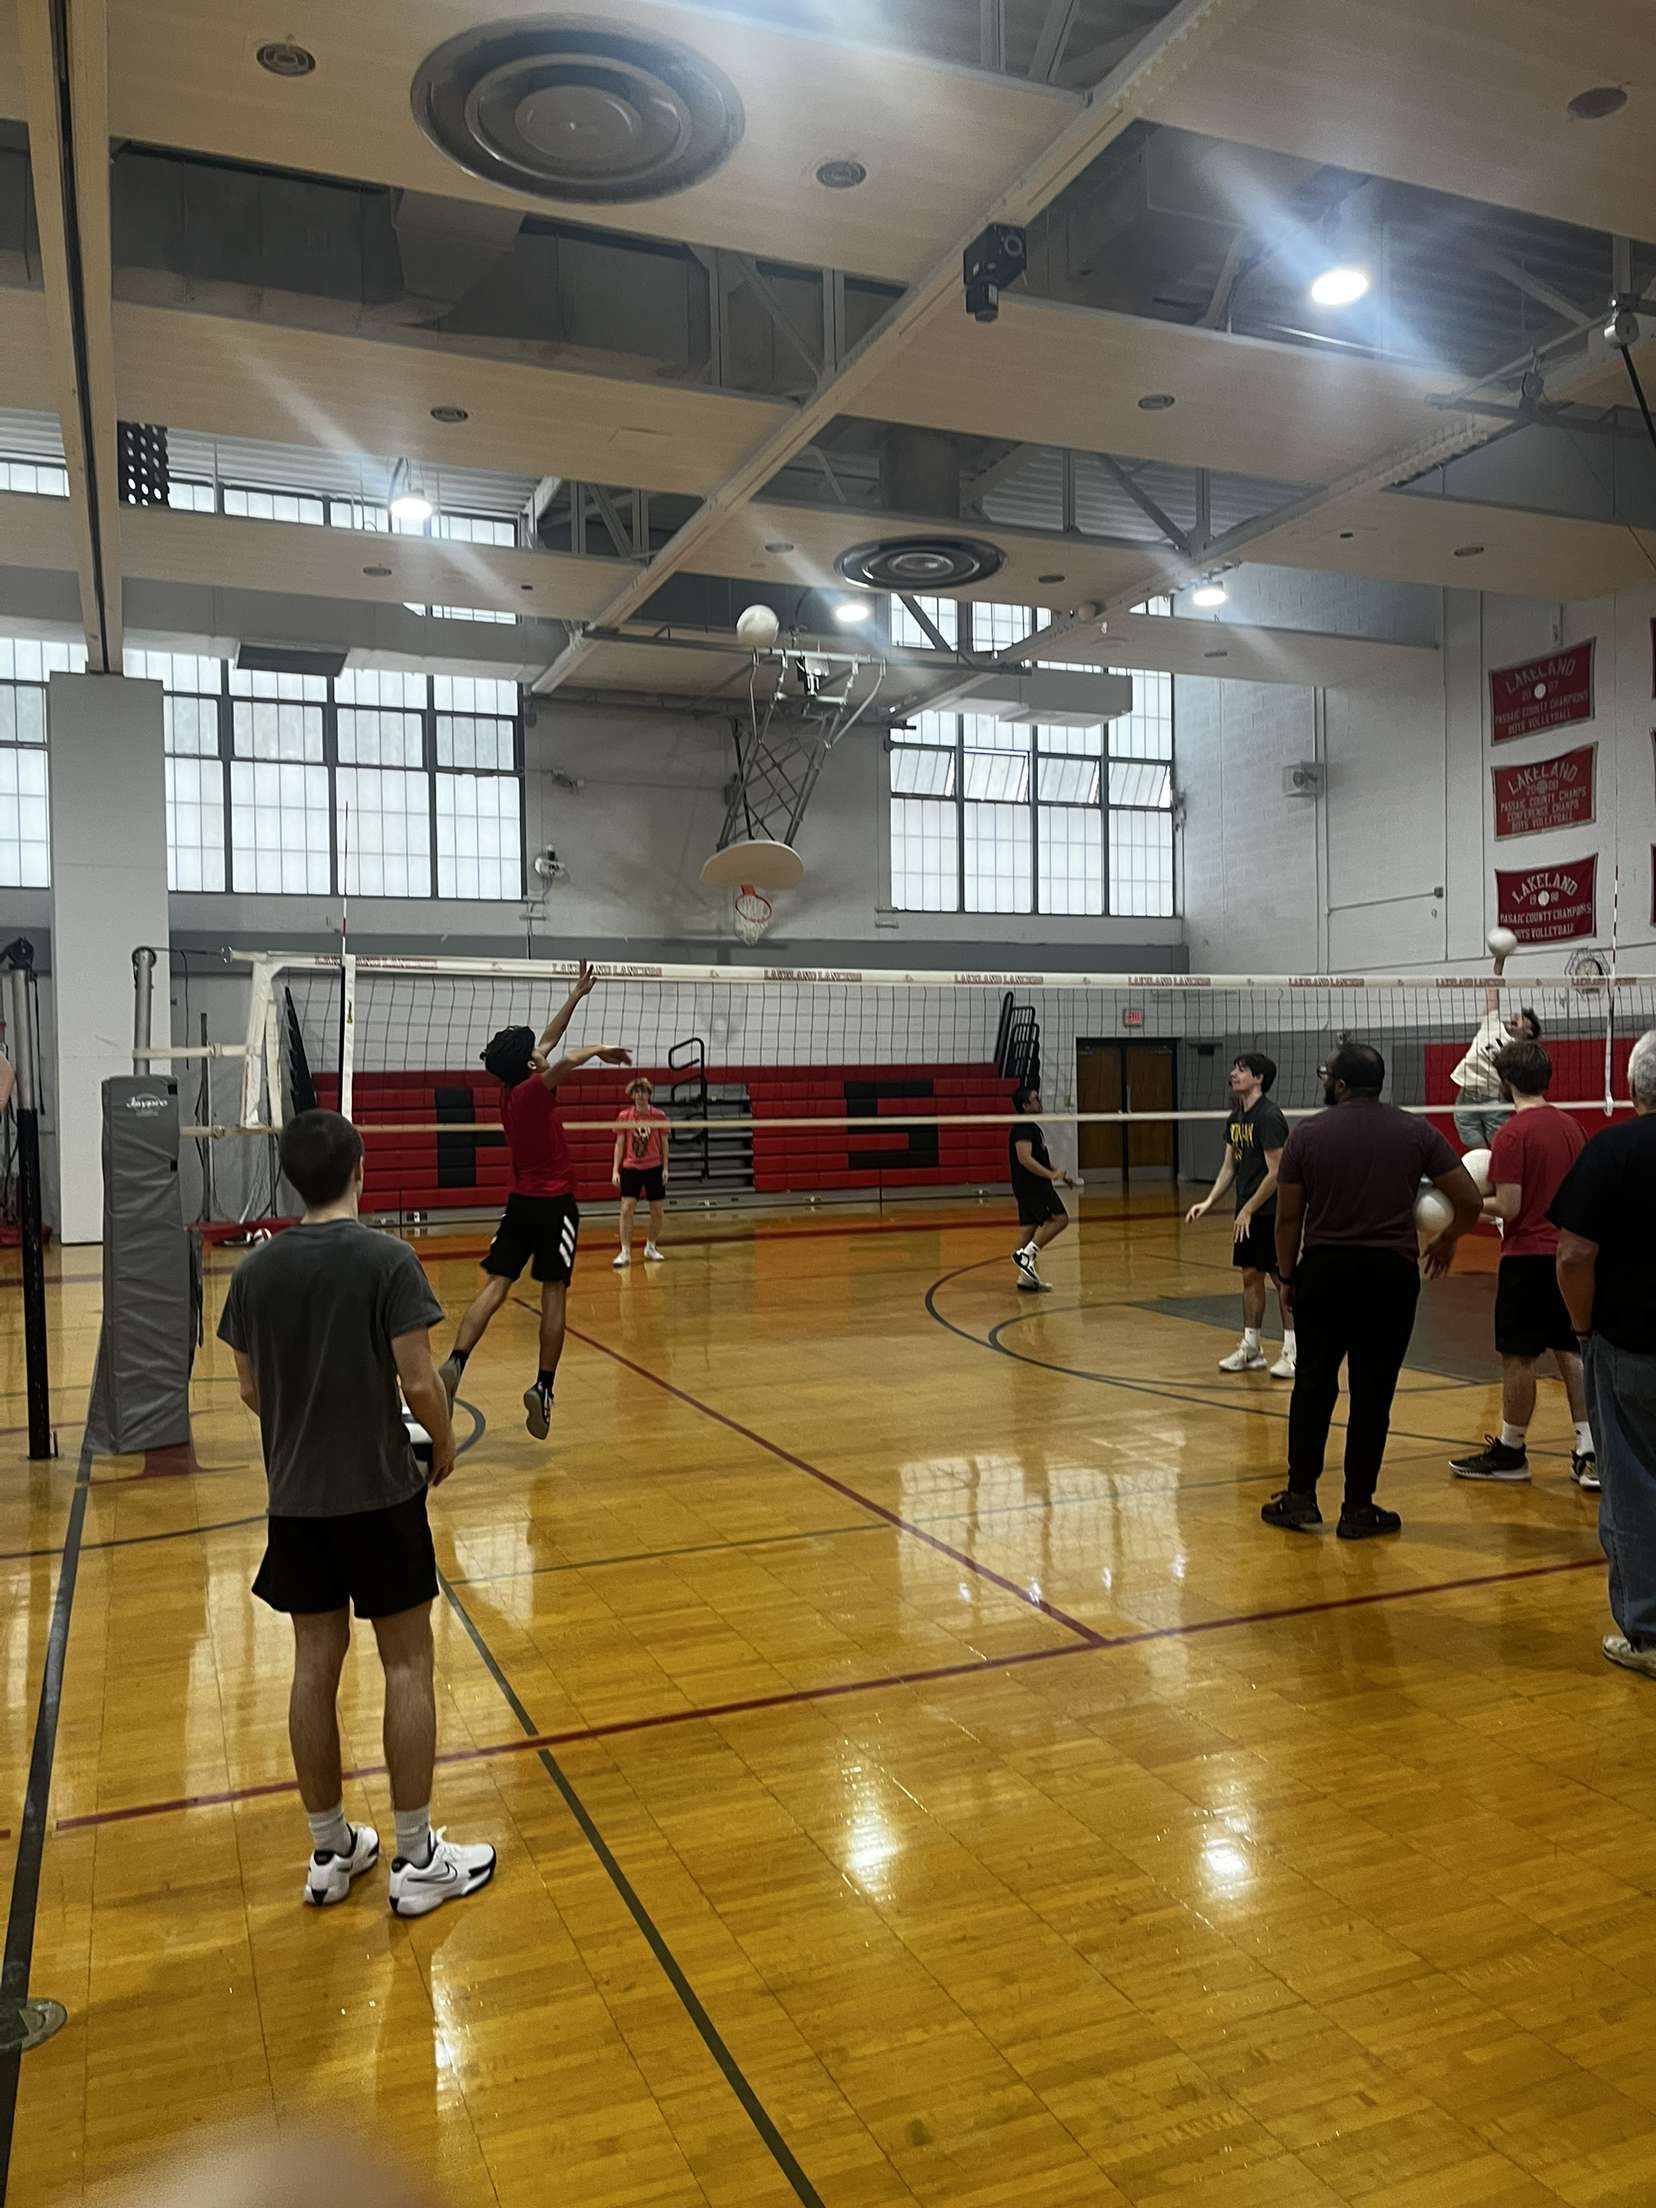 The boys volleyball team, pictured here, can be seen warming up their hands with a number of team activities.